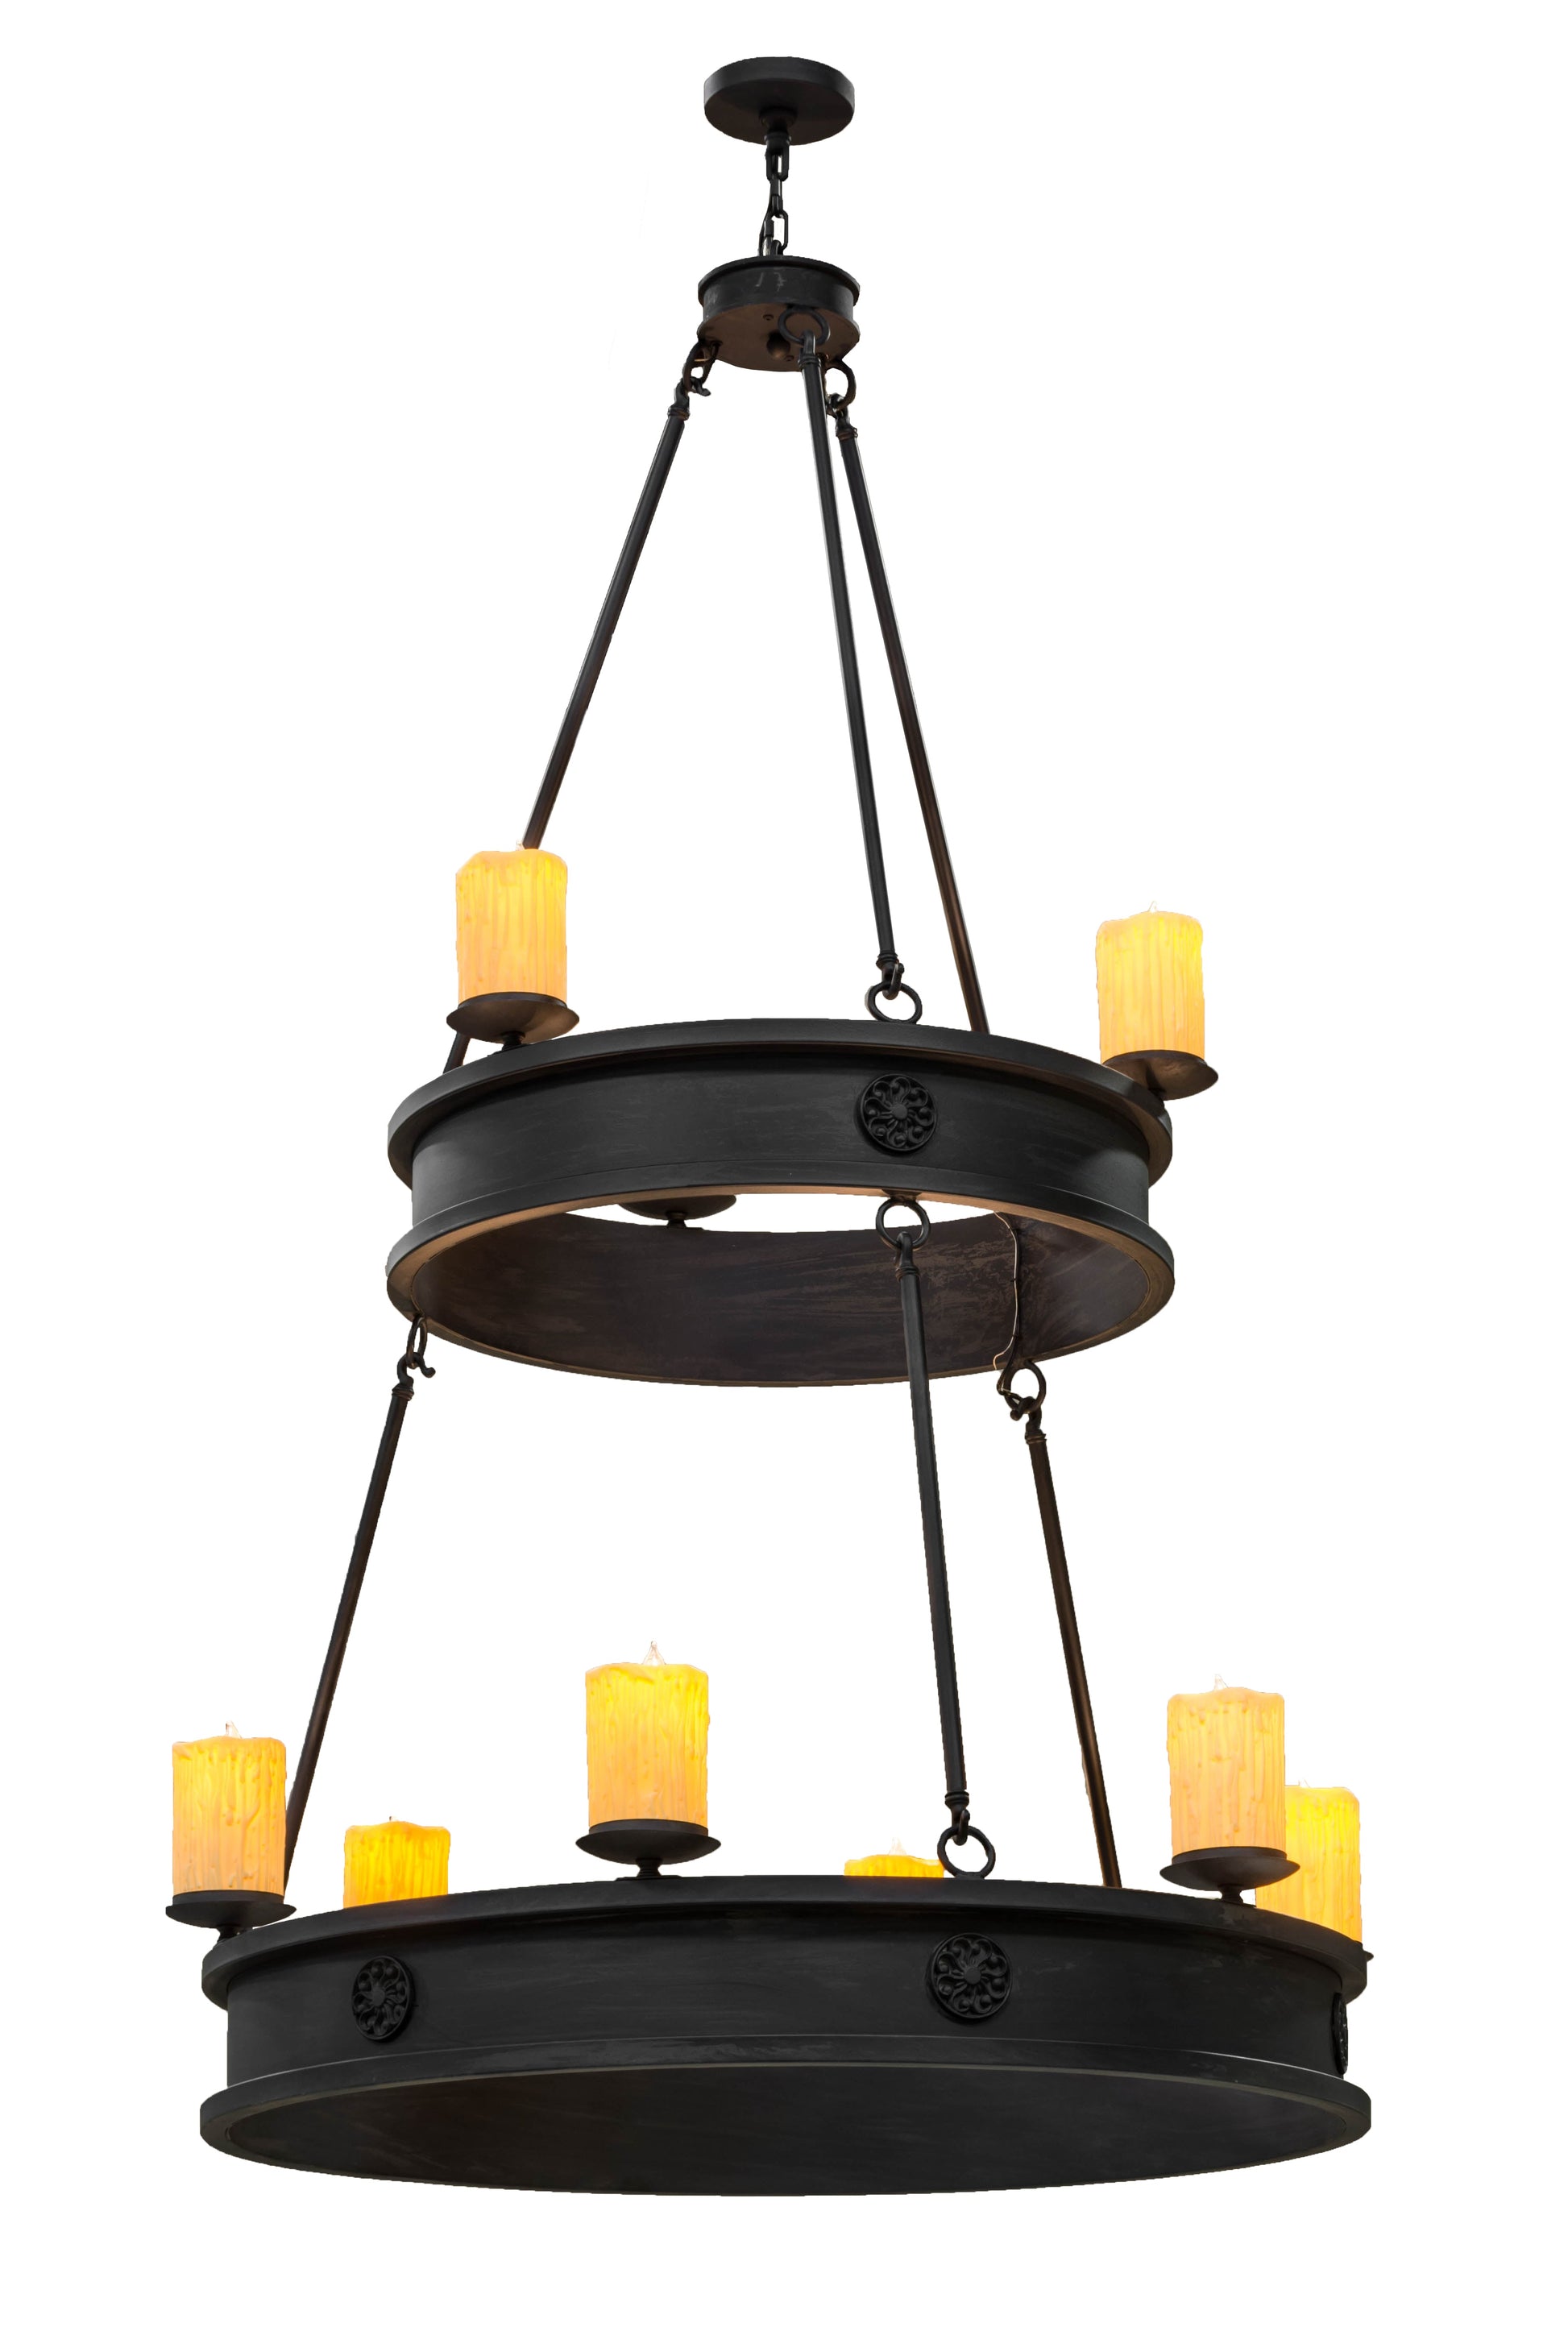 48" Lorenzo 9-Light Two Tier Chandelier by 2nd Ave Lighting